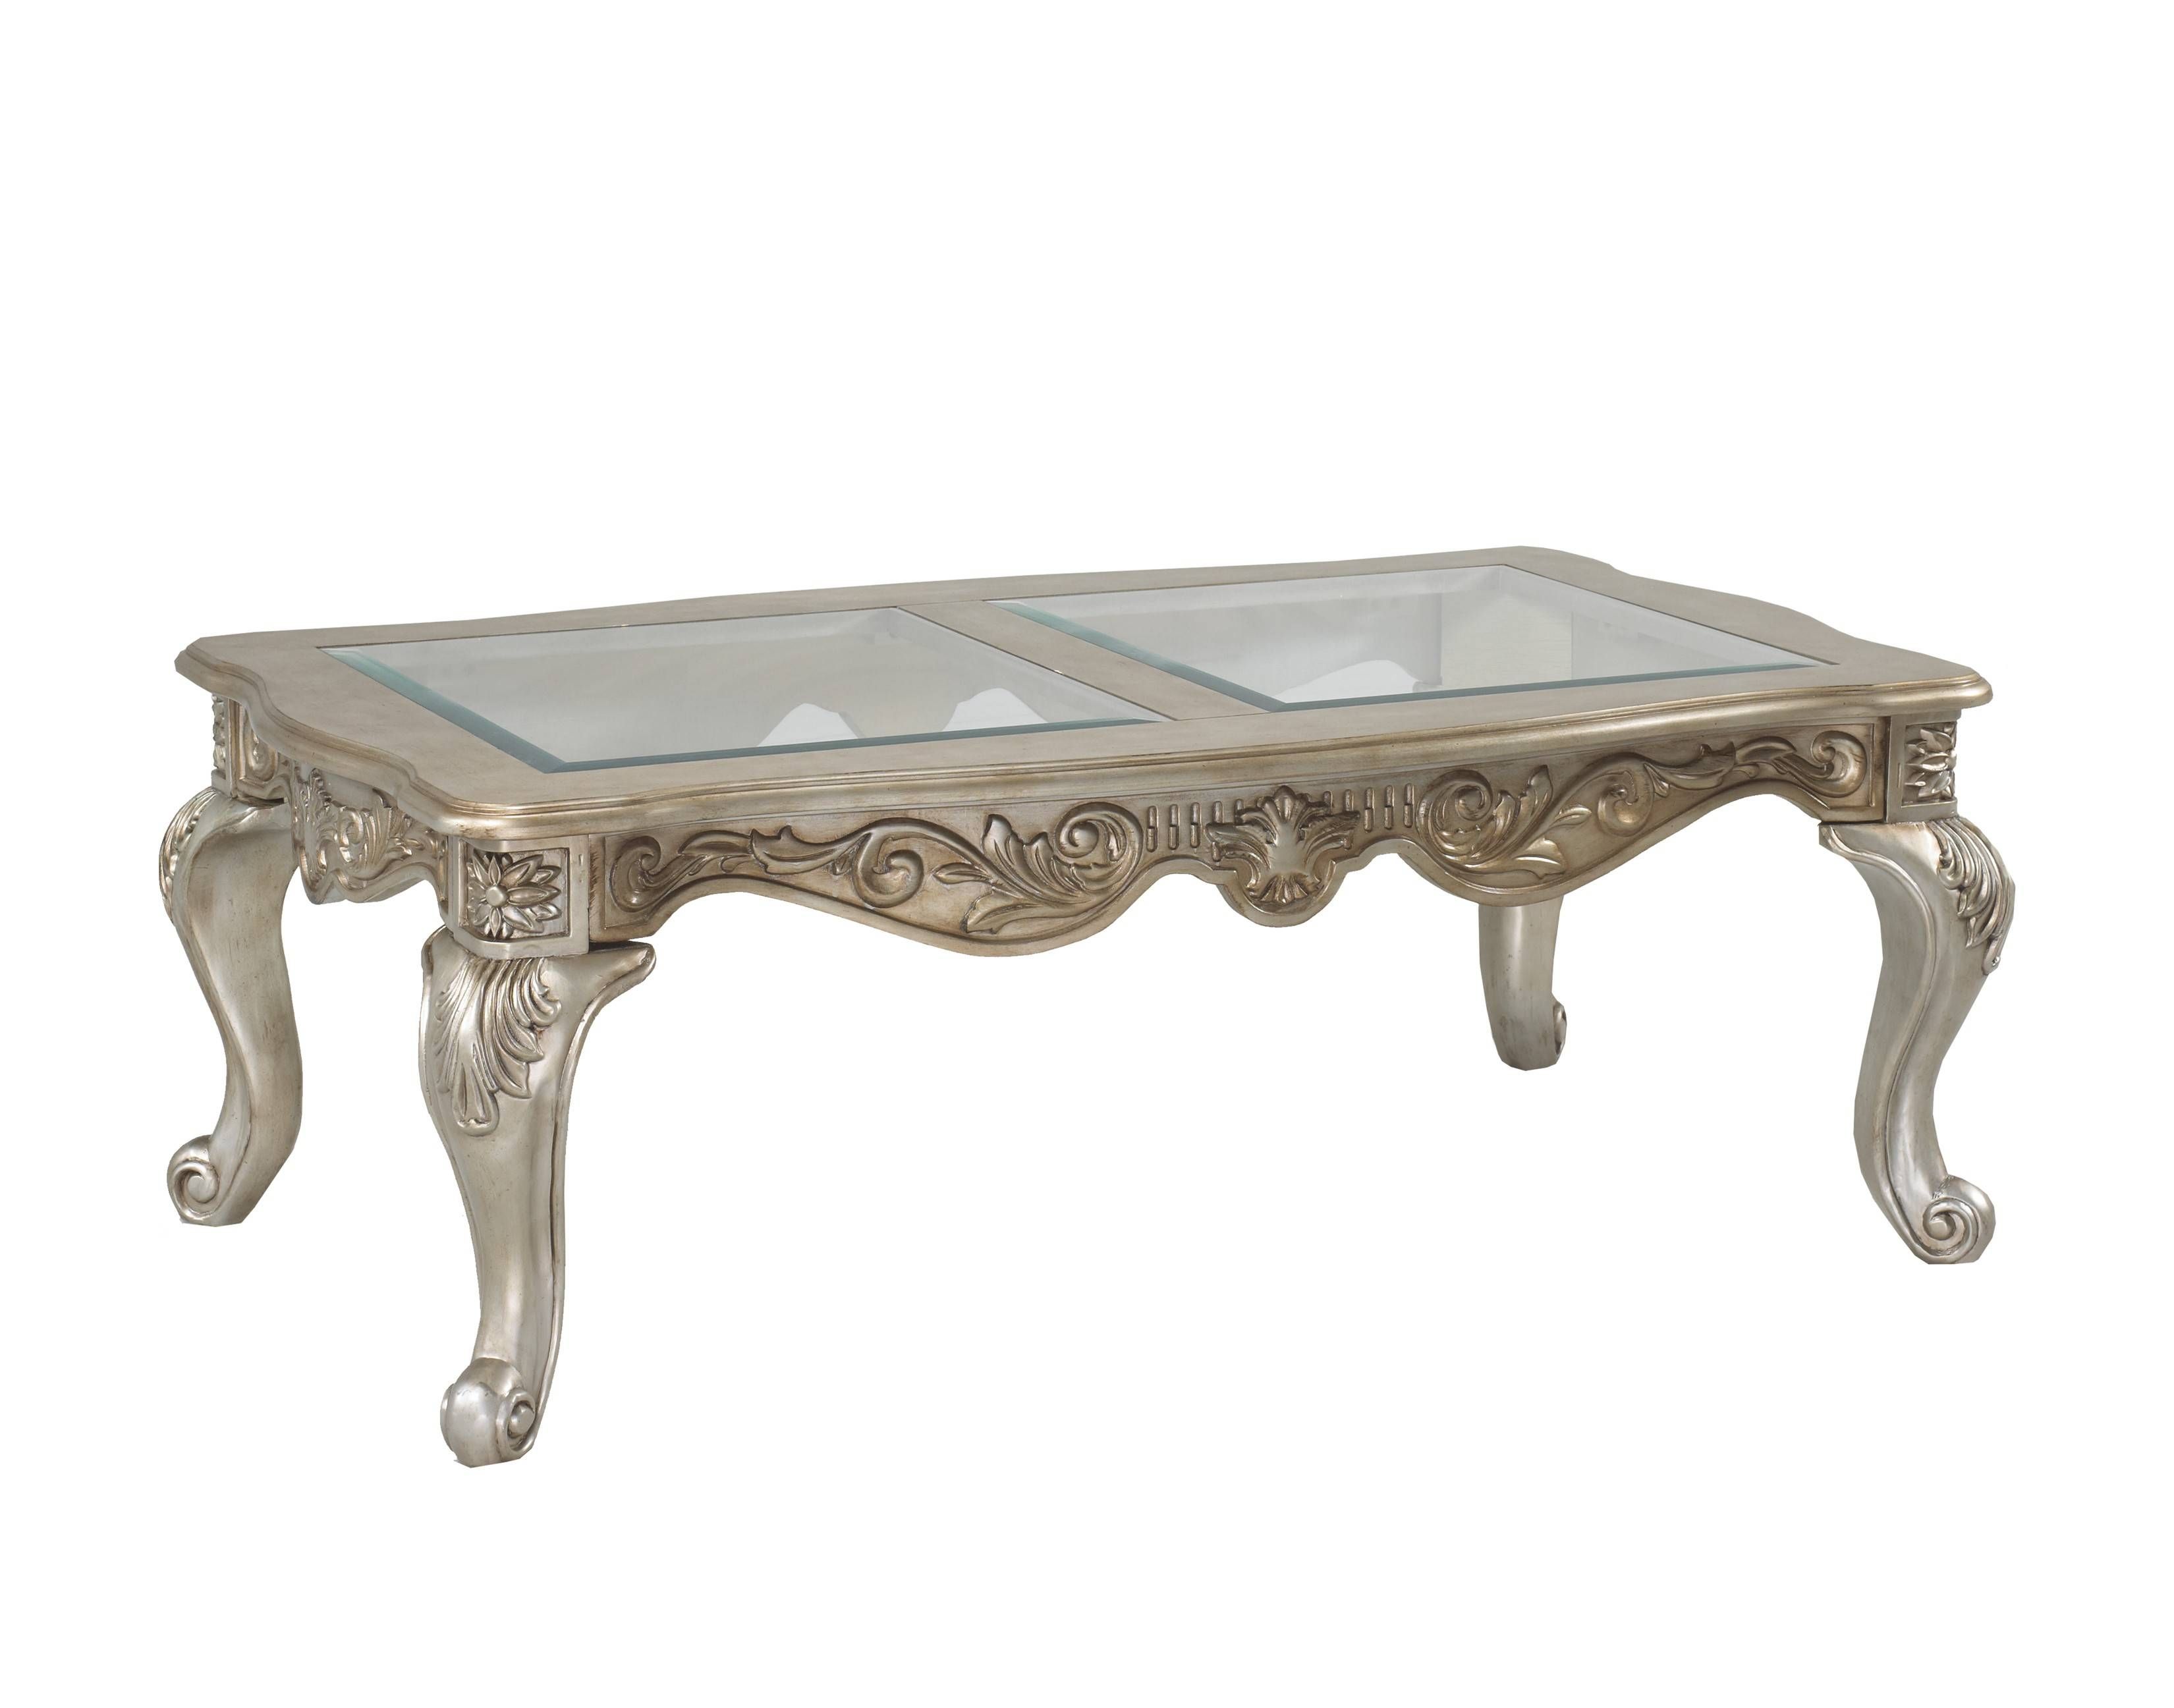 Antique French Glass Top Coffee Tables | Coffee Tables Decoration Inside Retro Glass Top Coffee Tables (View 3 of 30)